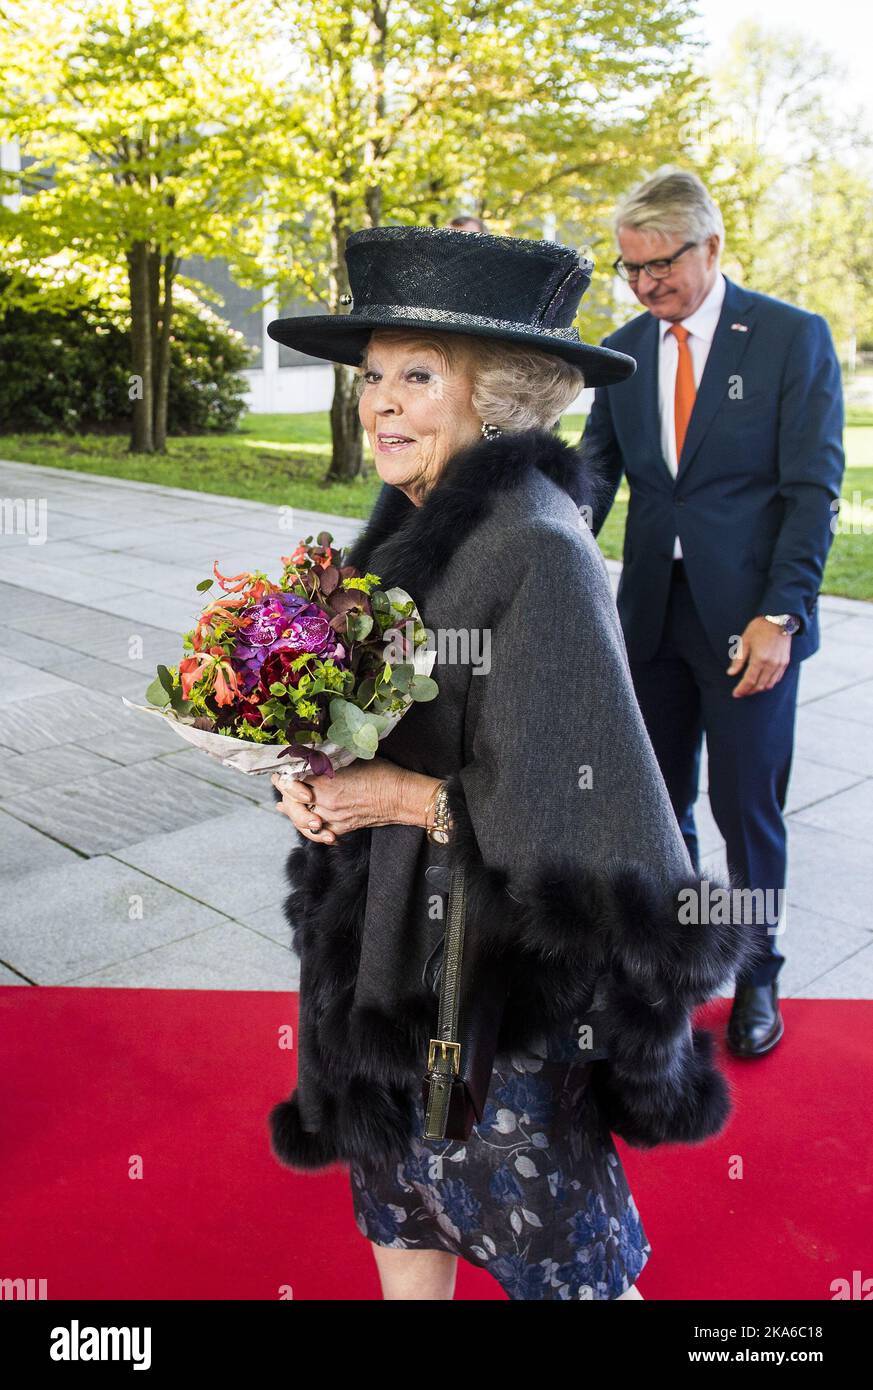 Oslo, Norway May 09, 2015. Princess Beatrix of the Netherlands, ecorted city Oslo Mayor Fabian Stang, attends the opening of an exhibition pairing the works of artists Edvard Munch and Vincent van Gogh at the Munch Museum in Oslo. Phot by Fredrik Varfjell, NTB scanpix Stock Photo